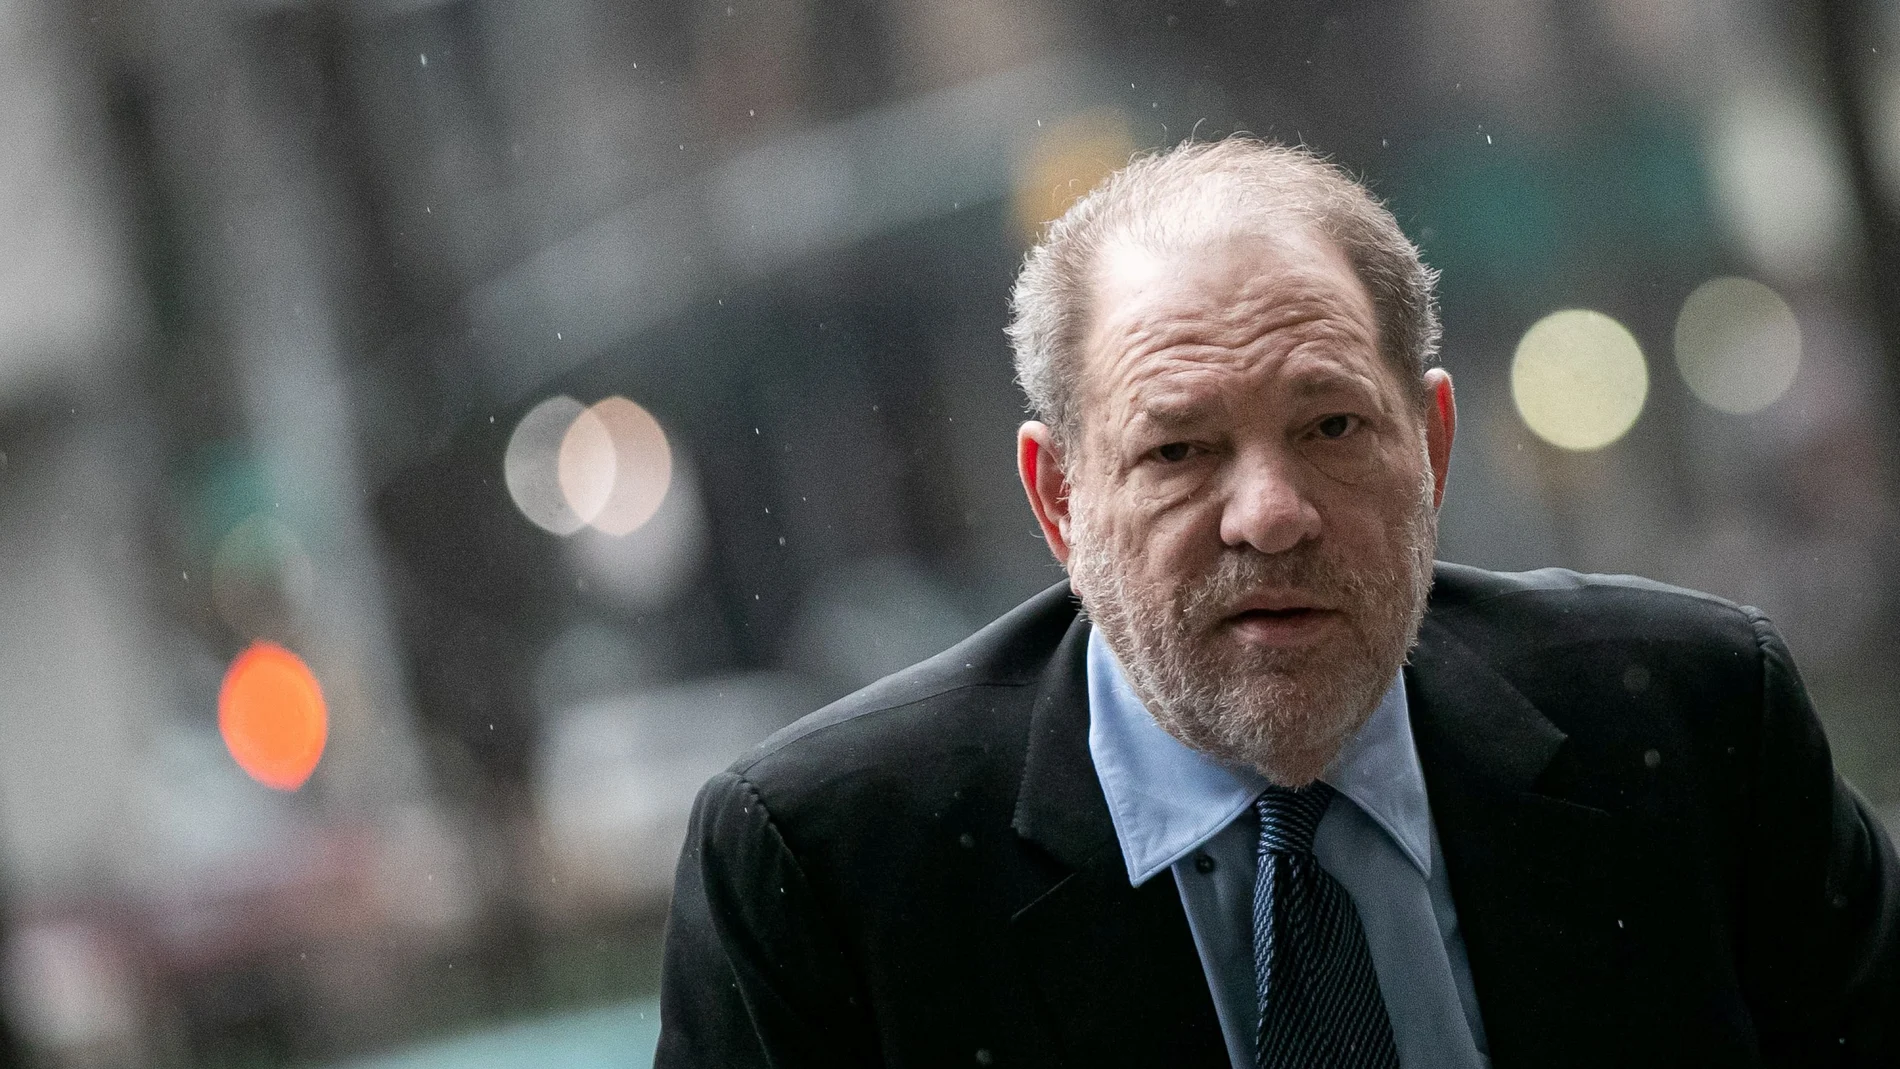 FILE PHOTO: Film producer Harvey Weinstein arrives at New York Criminal Court for his sexual assault trial in the Manhattan borough of New York City